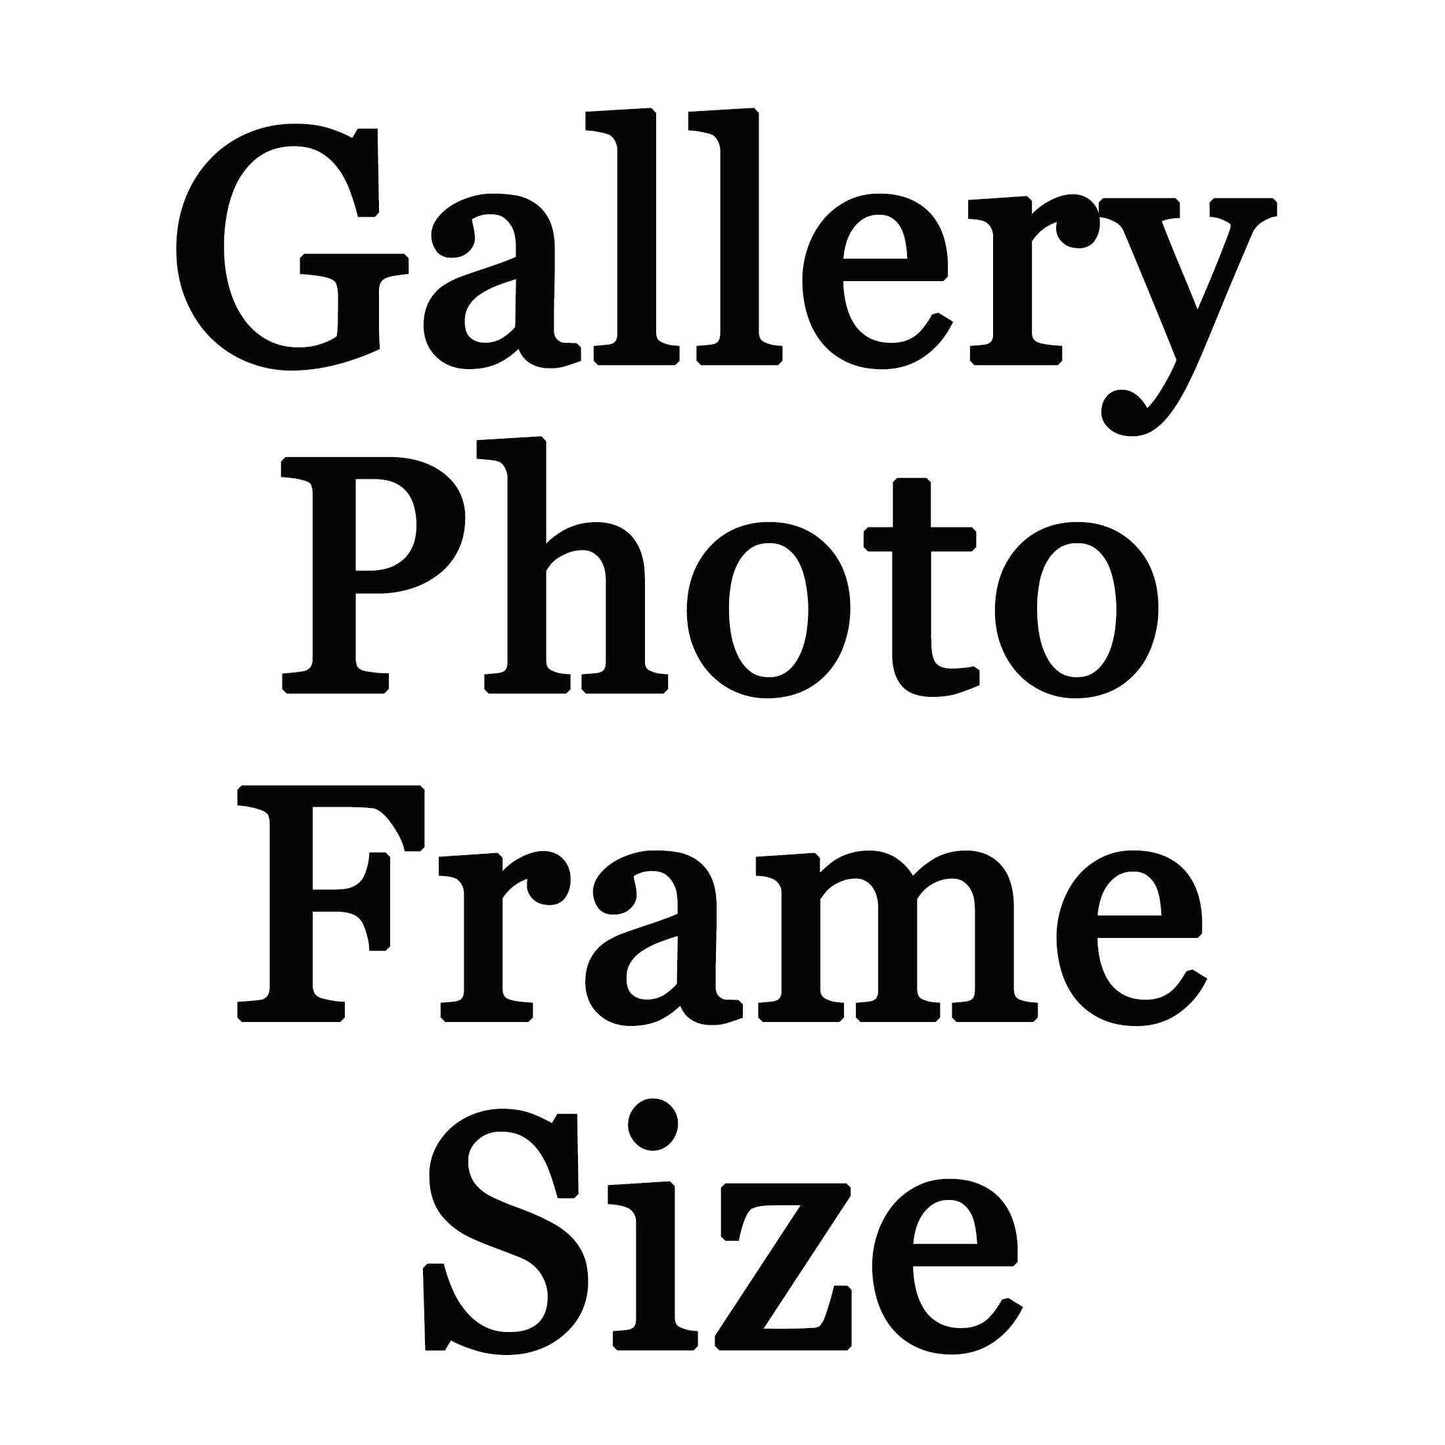 Gallery Photo Frame UPCHARGE for Size 16x20. This Option belongs to the Main Product. DON'T DELETE the Main Product or this Option if you want this Size - FromPicToArt